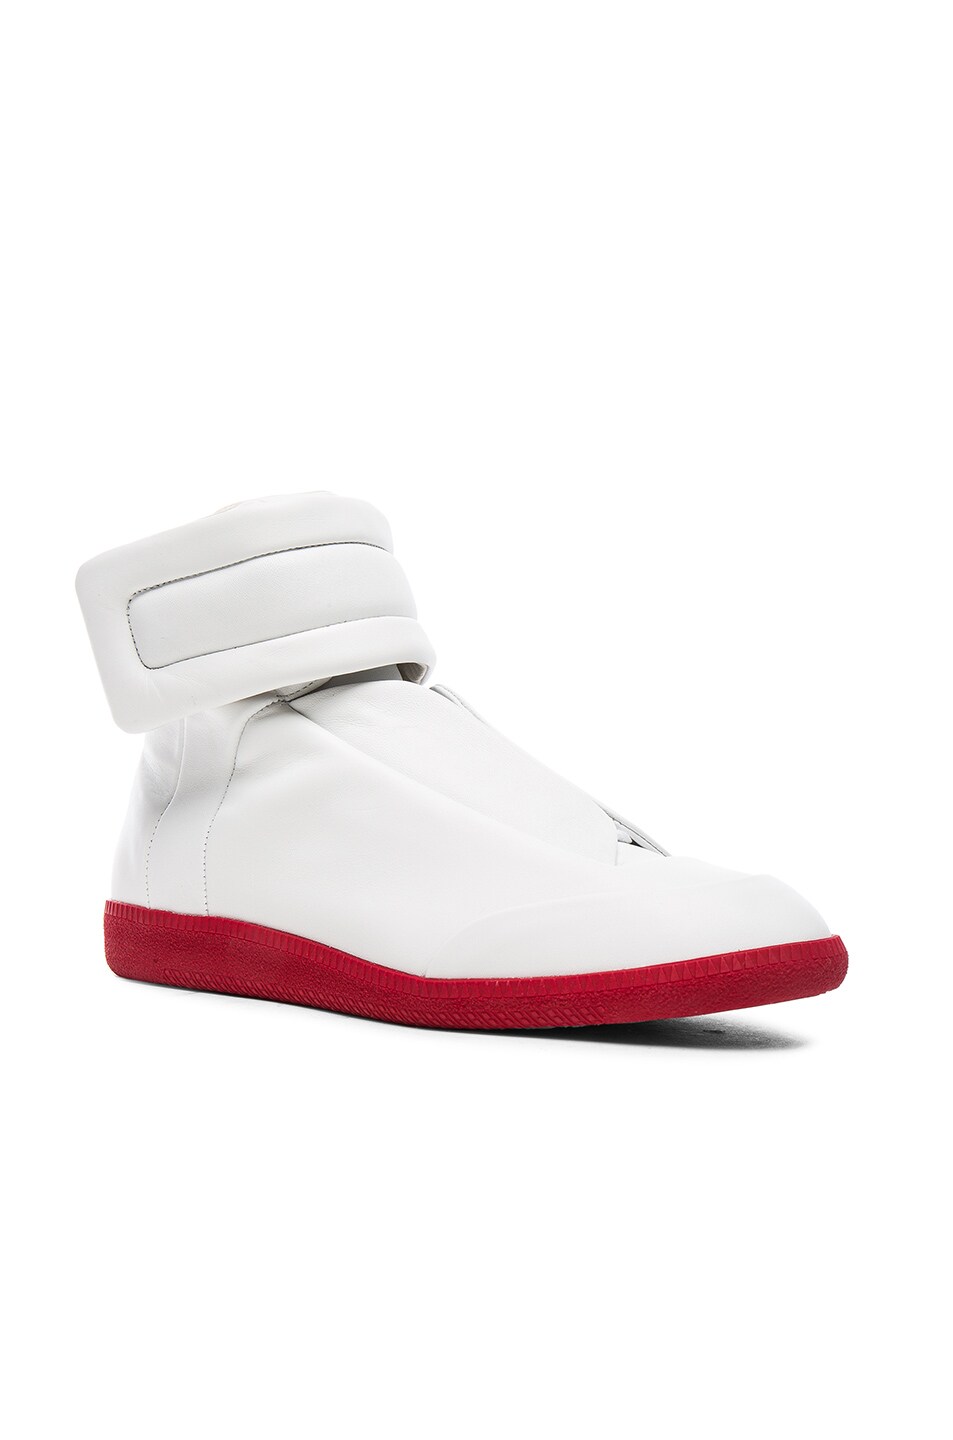 Image 1 of Maison Margiela Calfskin Future High Tops in White & Red